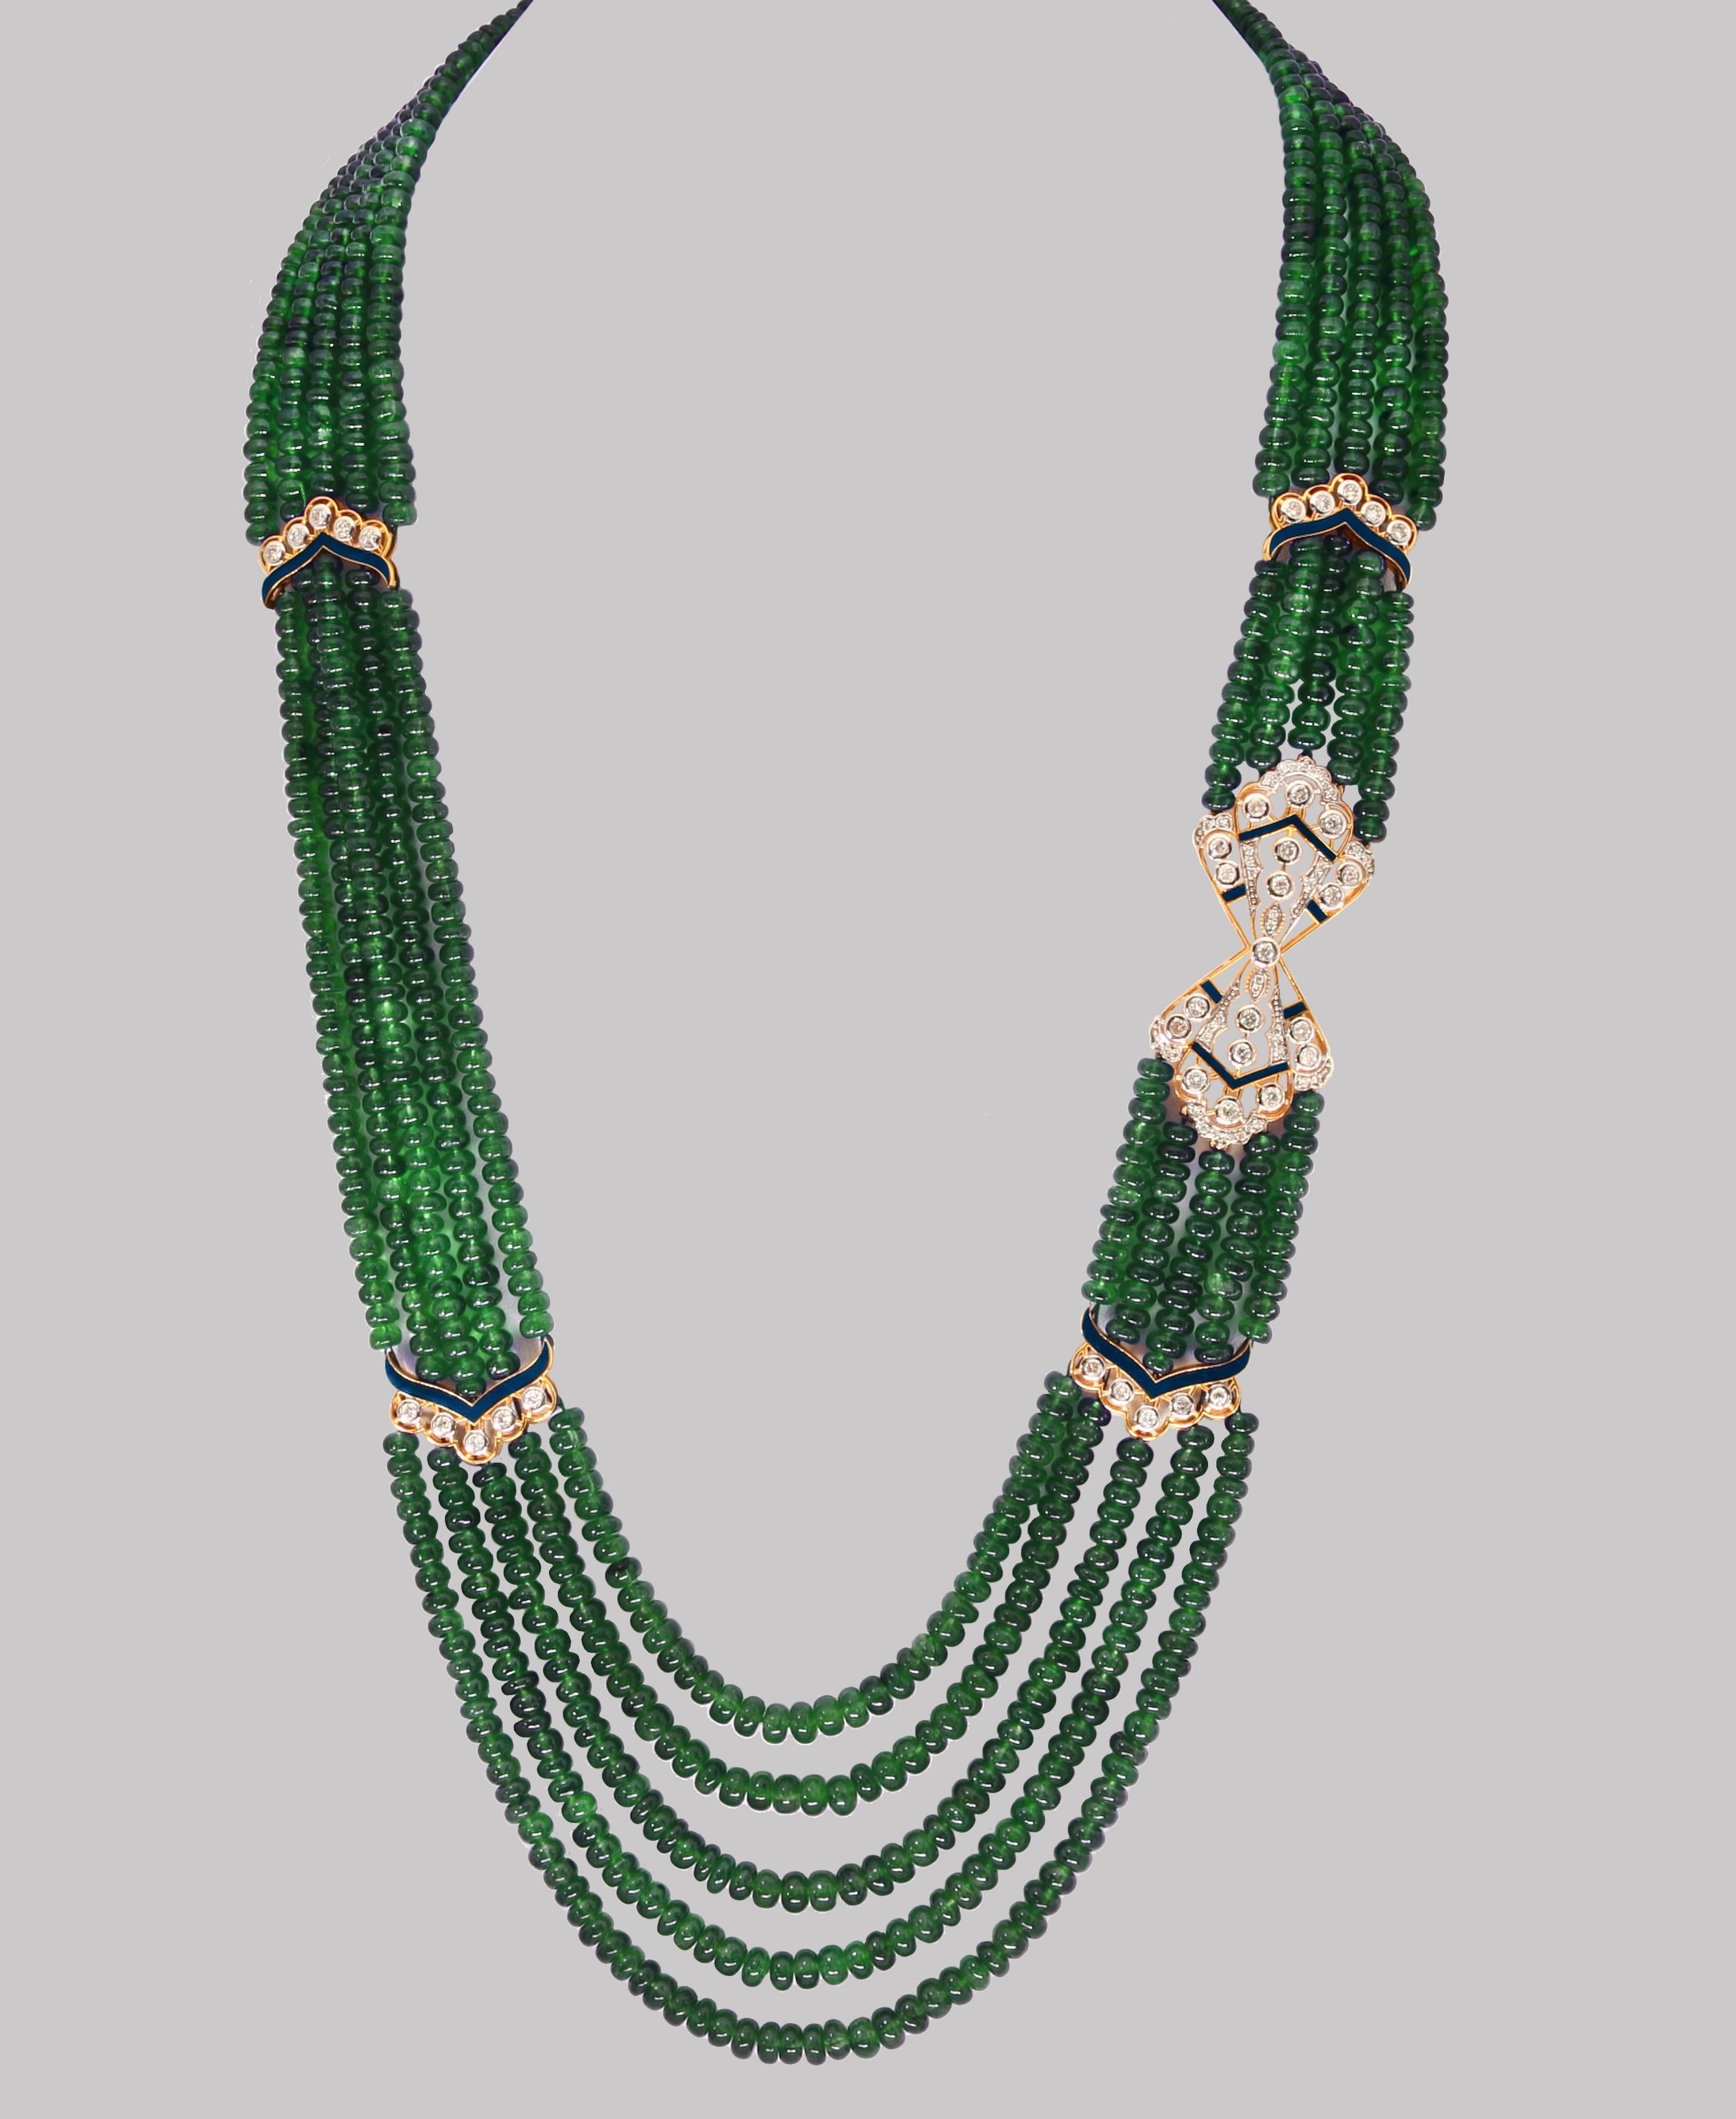 Approximately 300 Carat  very fine Emerald Beads 5 Line Necklace With 14 Karat Yellow Gold Clasp Adjustable with multiple links
This spectacular Necklace   consisting of approximately 300 Ct  of fine beads.
The shine sparkle and brilliance with deep